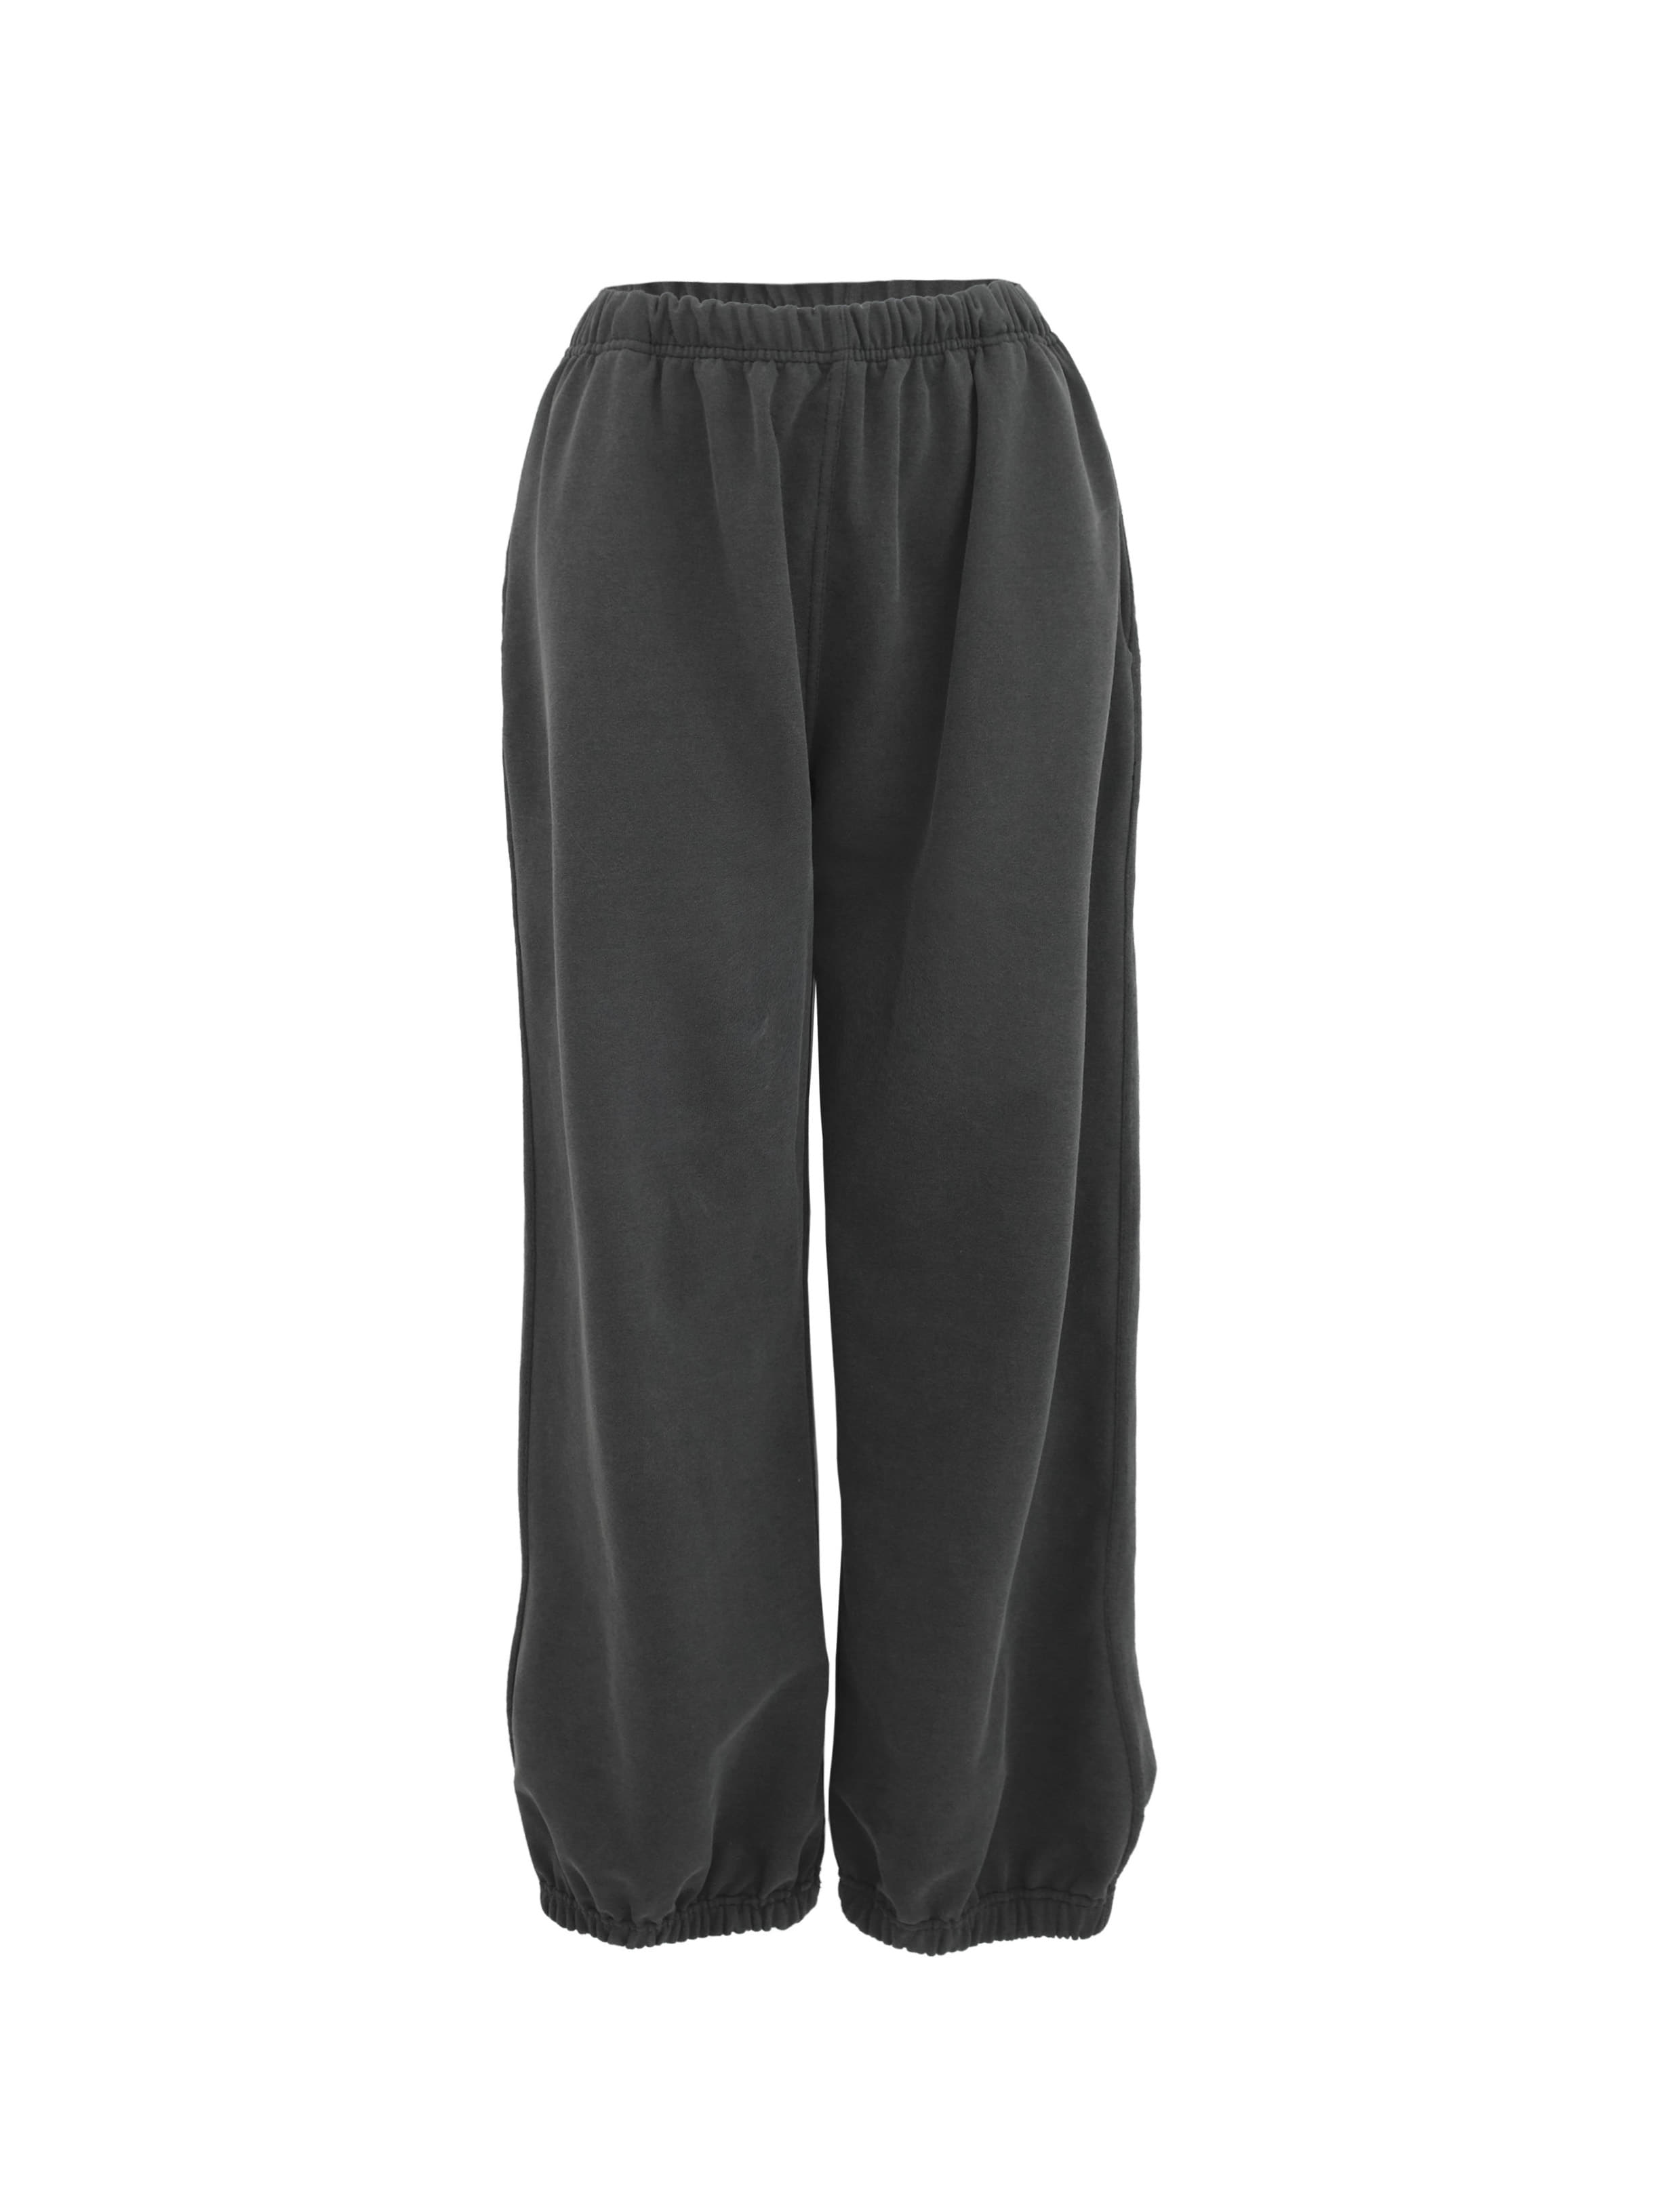 [ODOR MADE] Pigment jogger pants(*2시 이전 단독 주문시 당일출고)